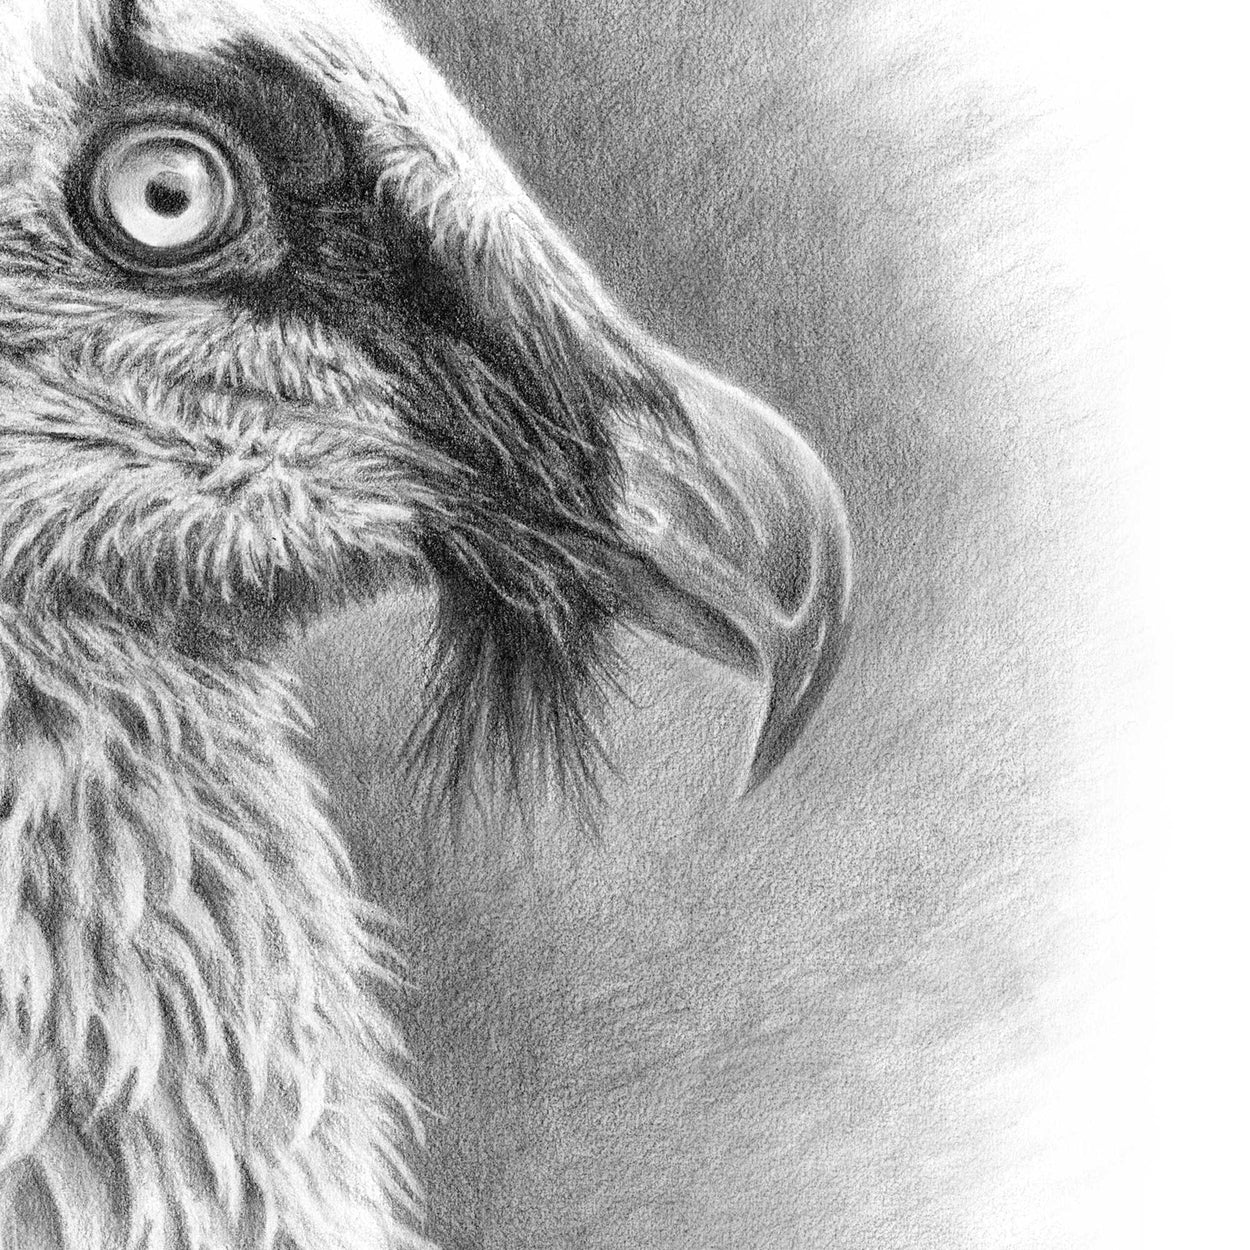 Close-up of a drawing of the beak and eye of a vulture